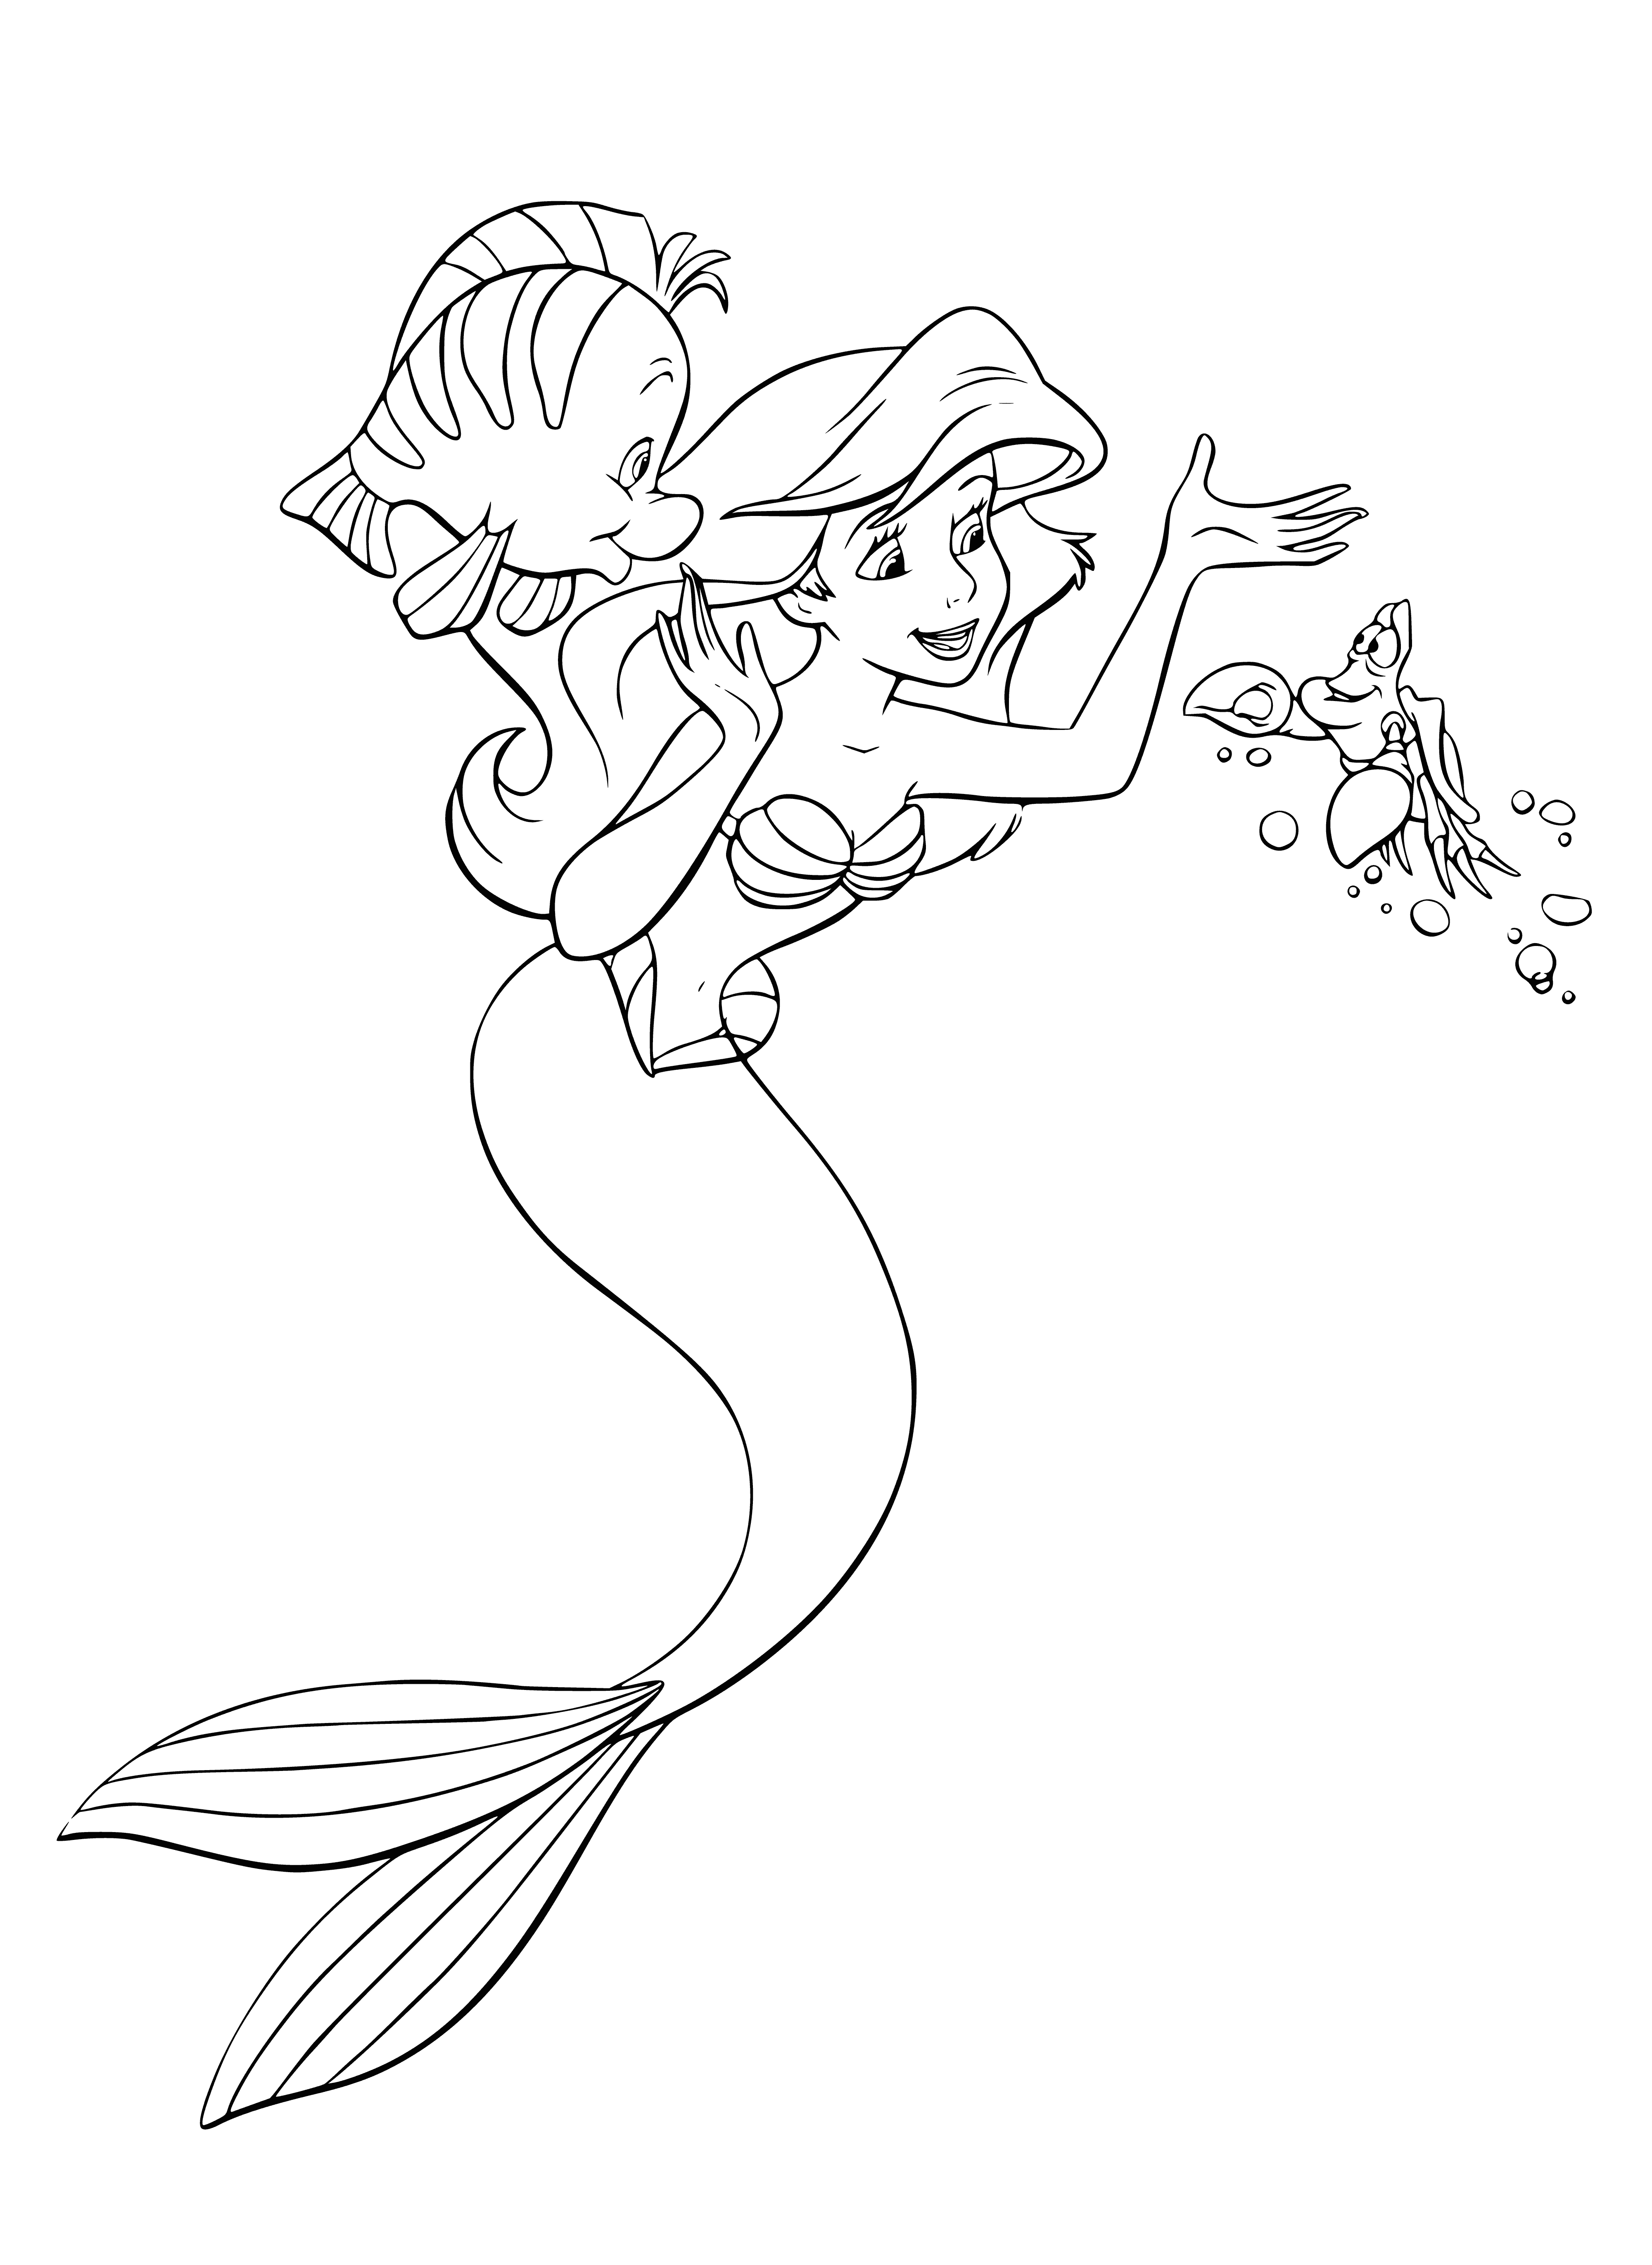 coloring page: Ariel and her friends Flounder and Sebastian swim in the ocean, smiling and happy with their arms around each other. #TheLittleMermaid